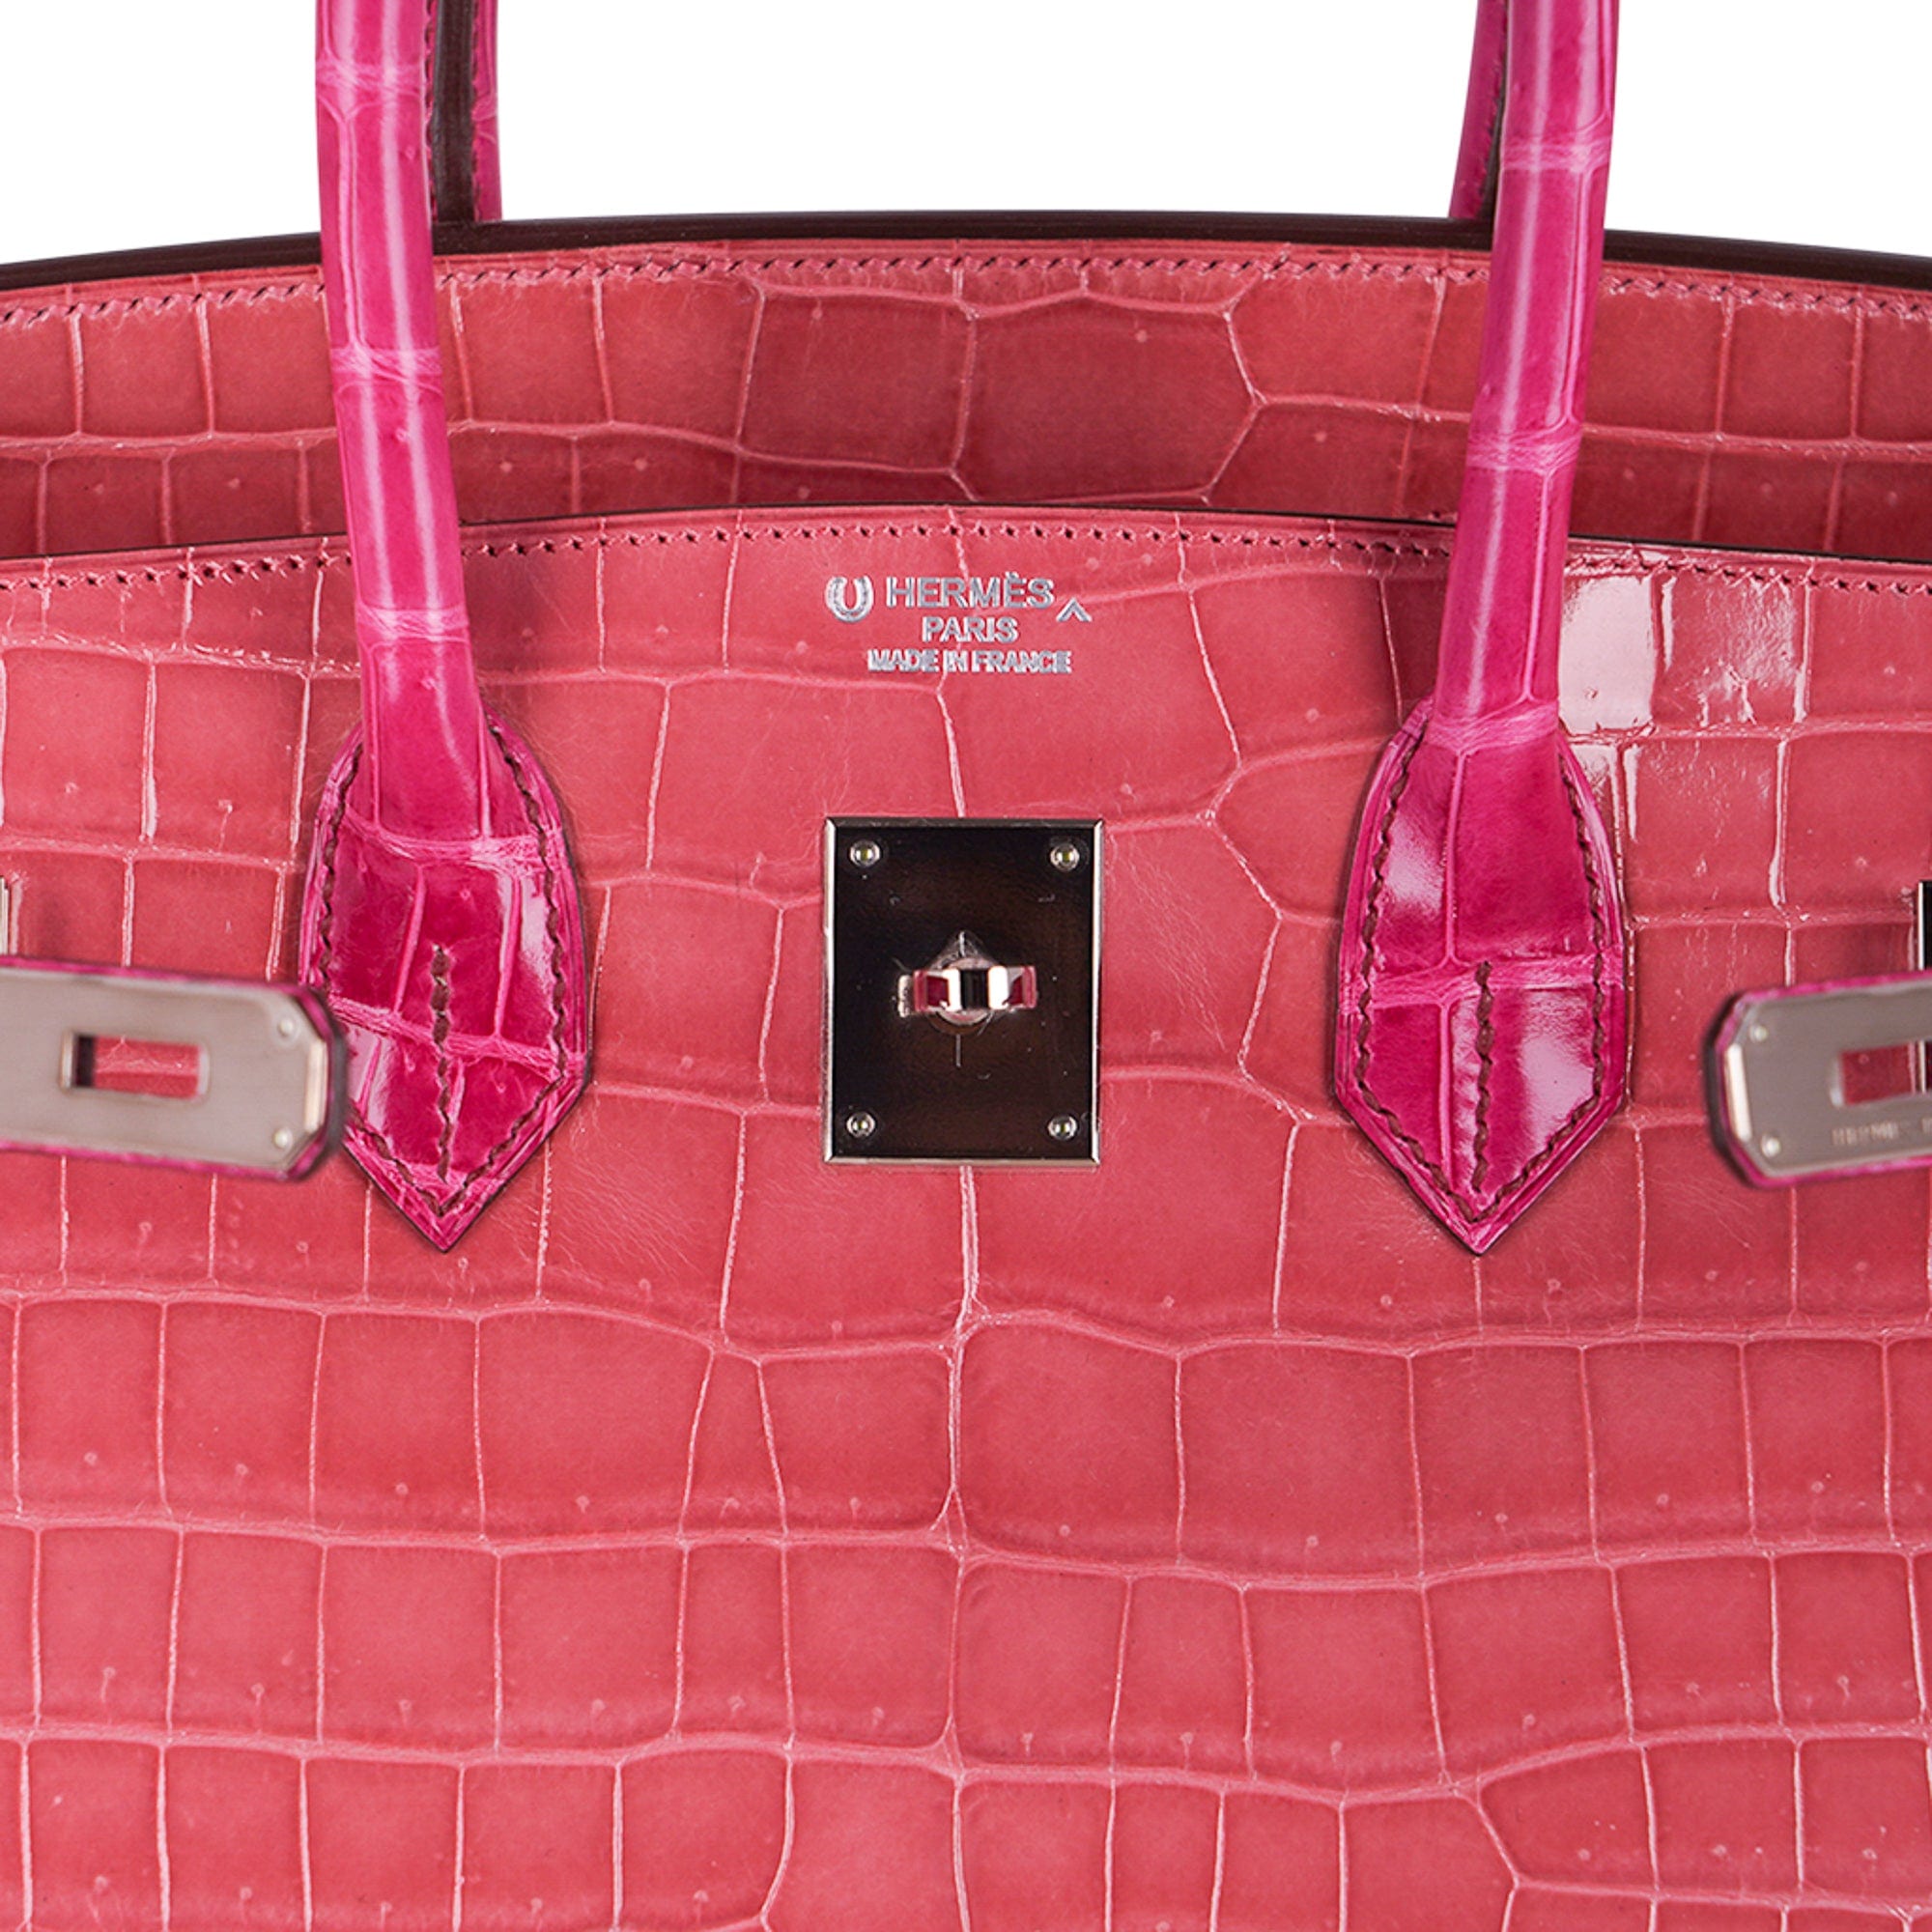 Sold at Auction: Hermes Limited Edition Tri-Color Birkin 35 W/Box